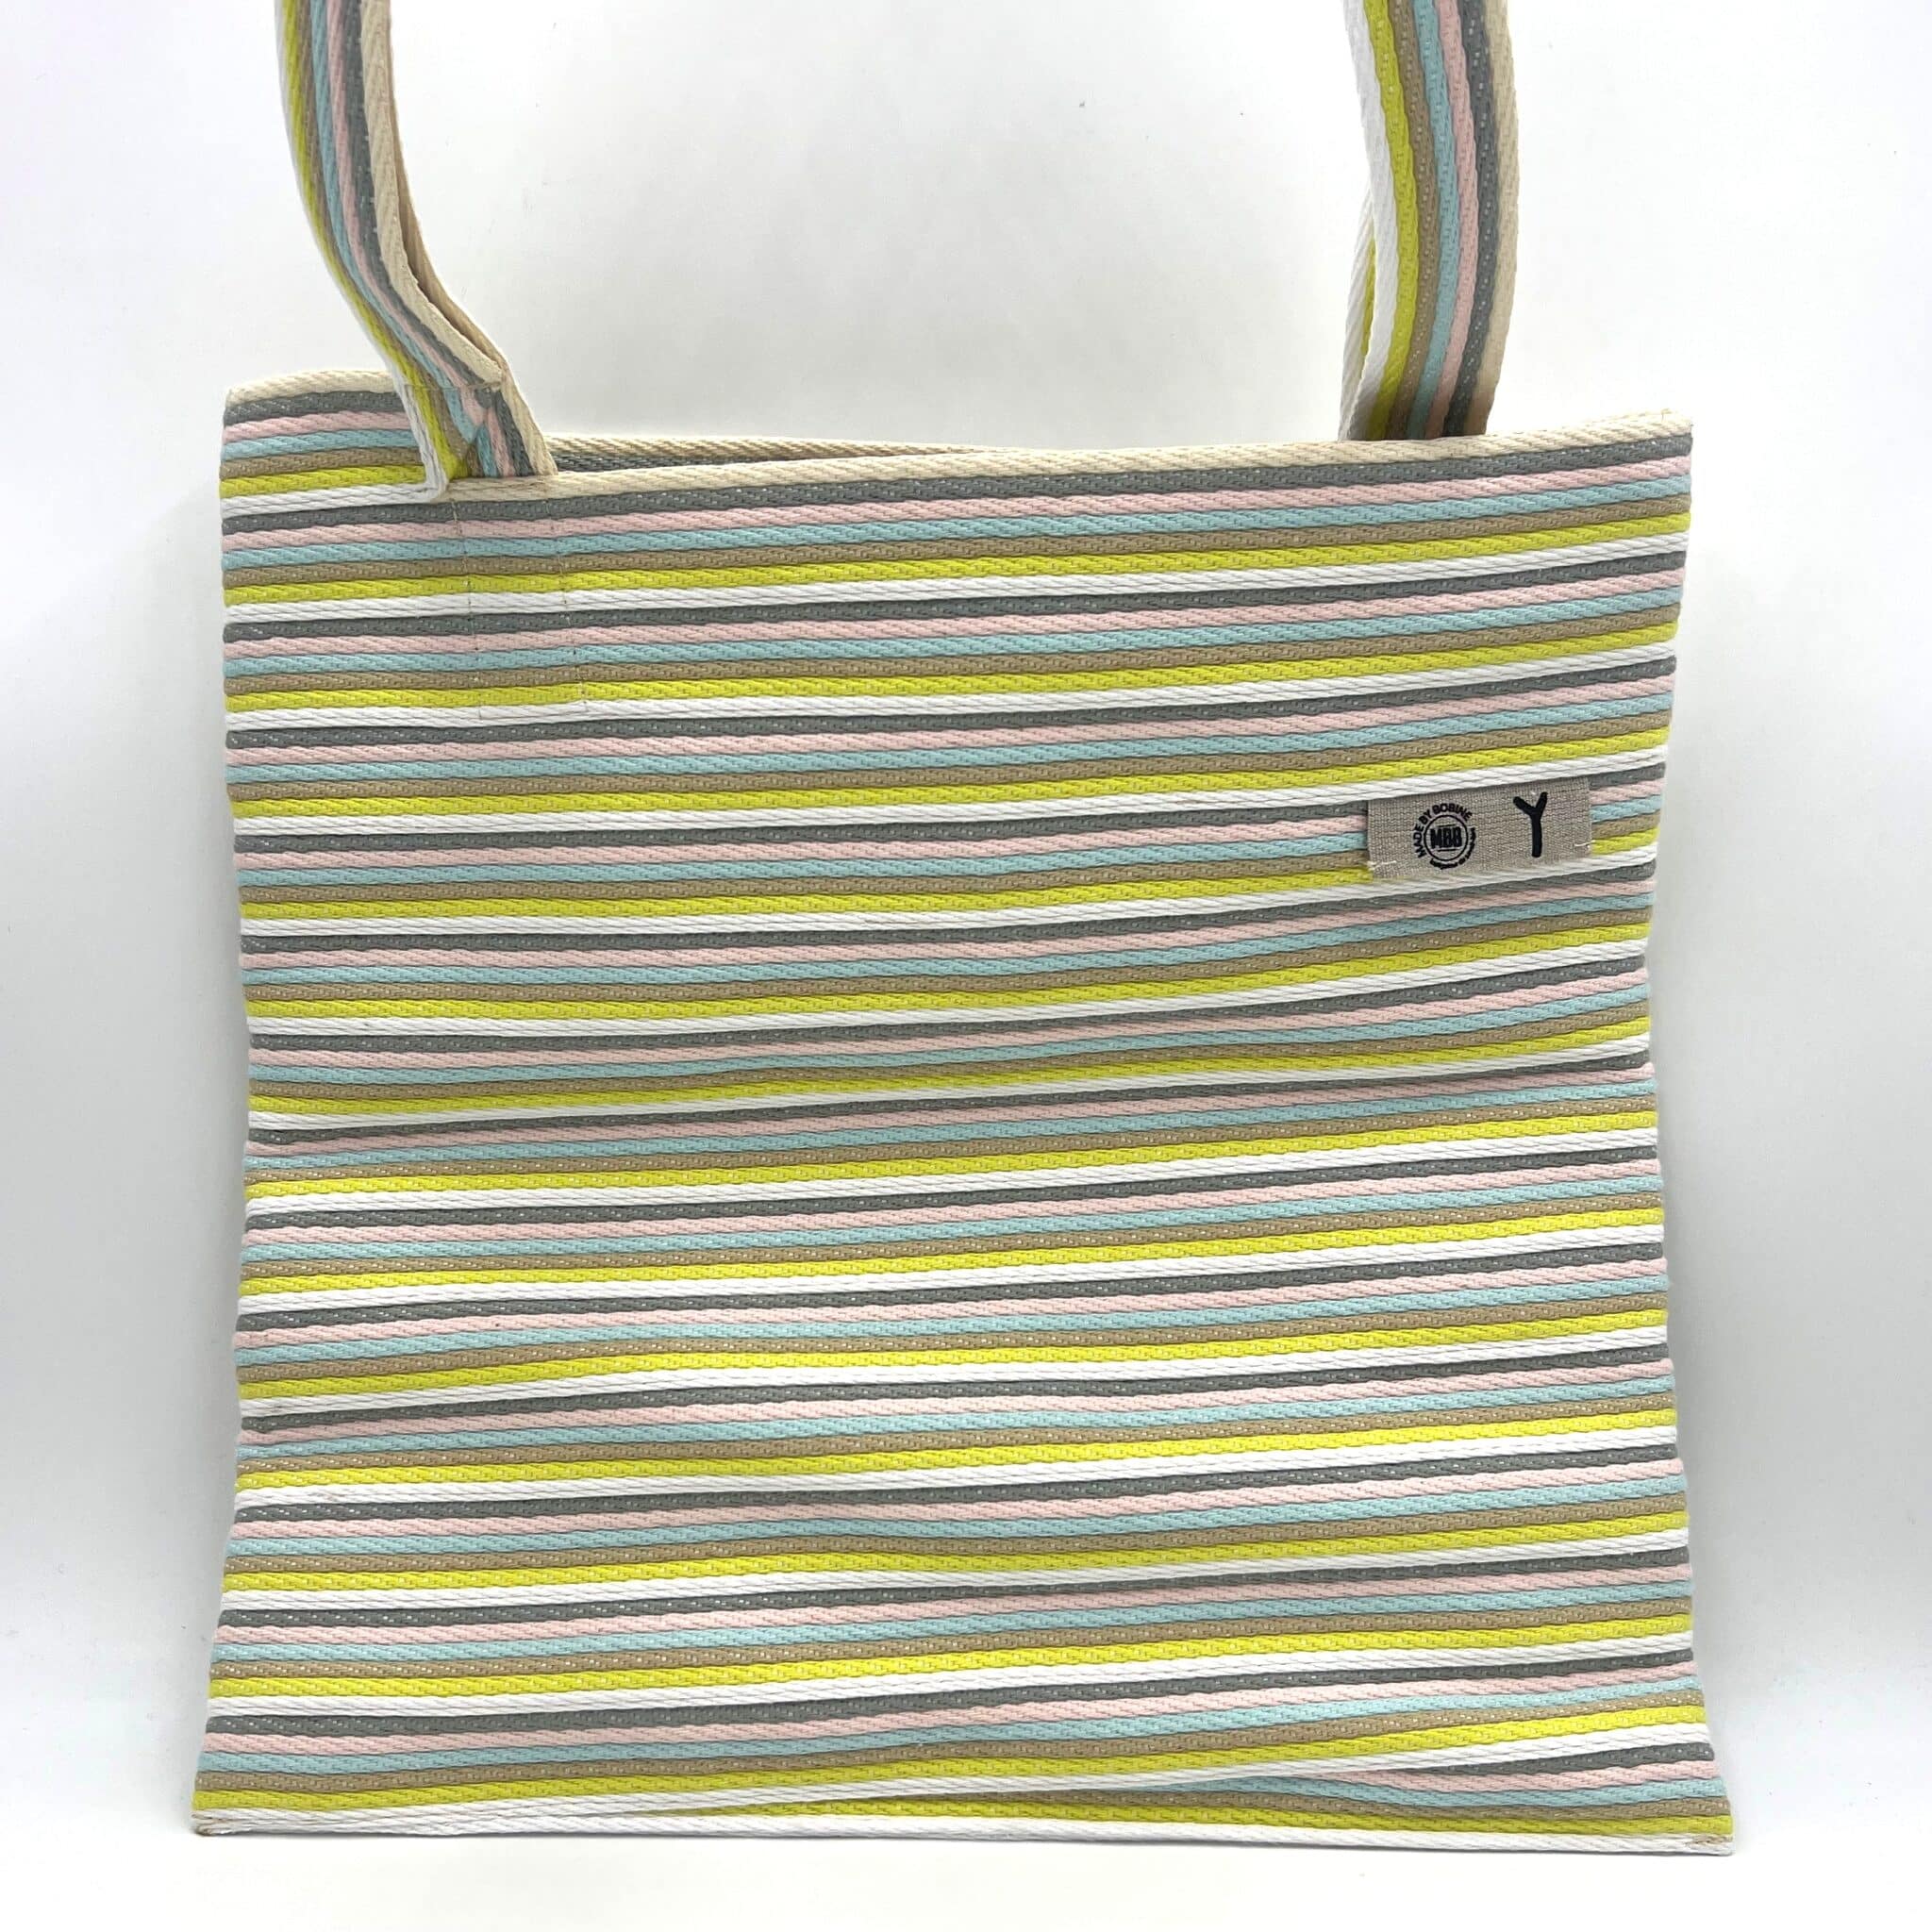 Sac CLARA by MBB et Amaury Poudray made in france et upcyclé